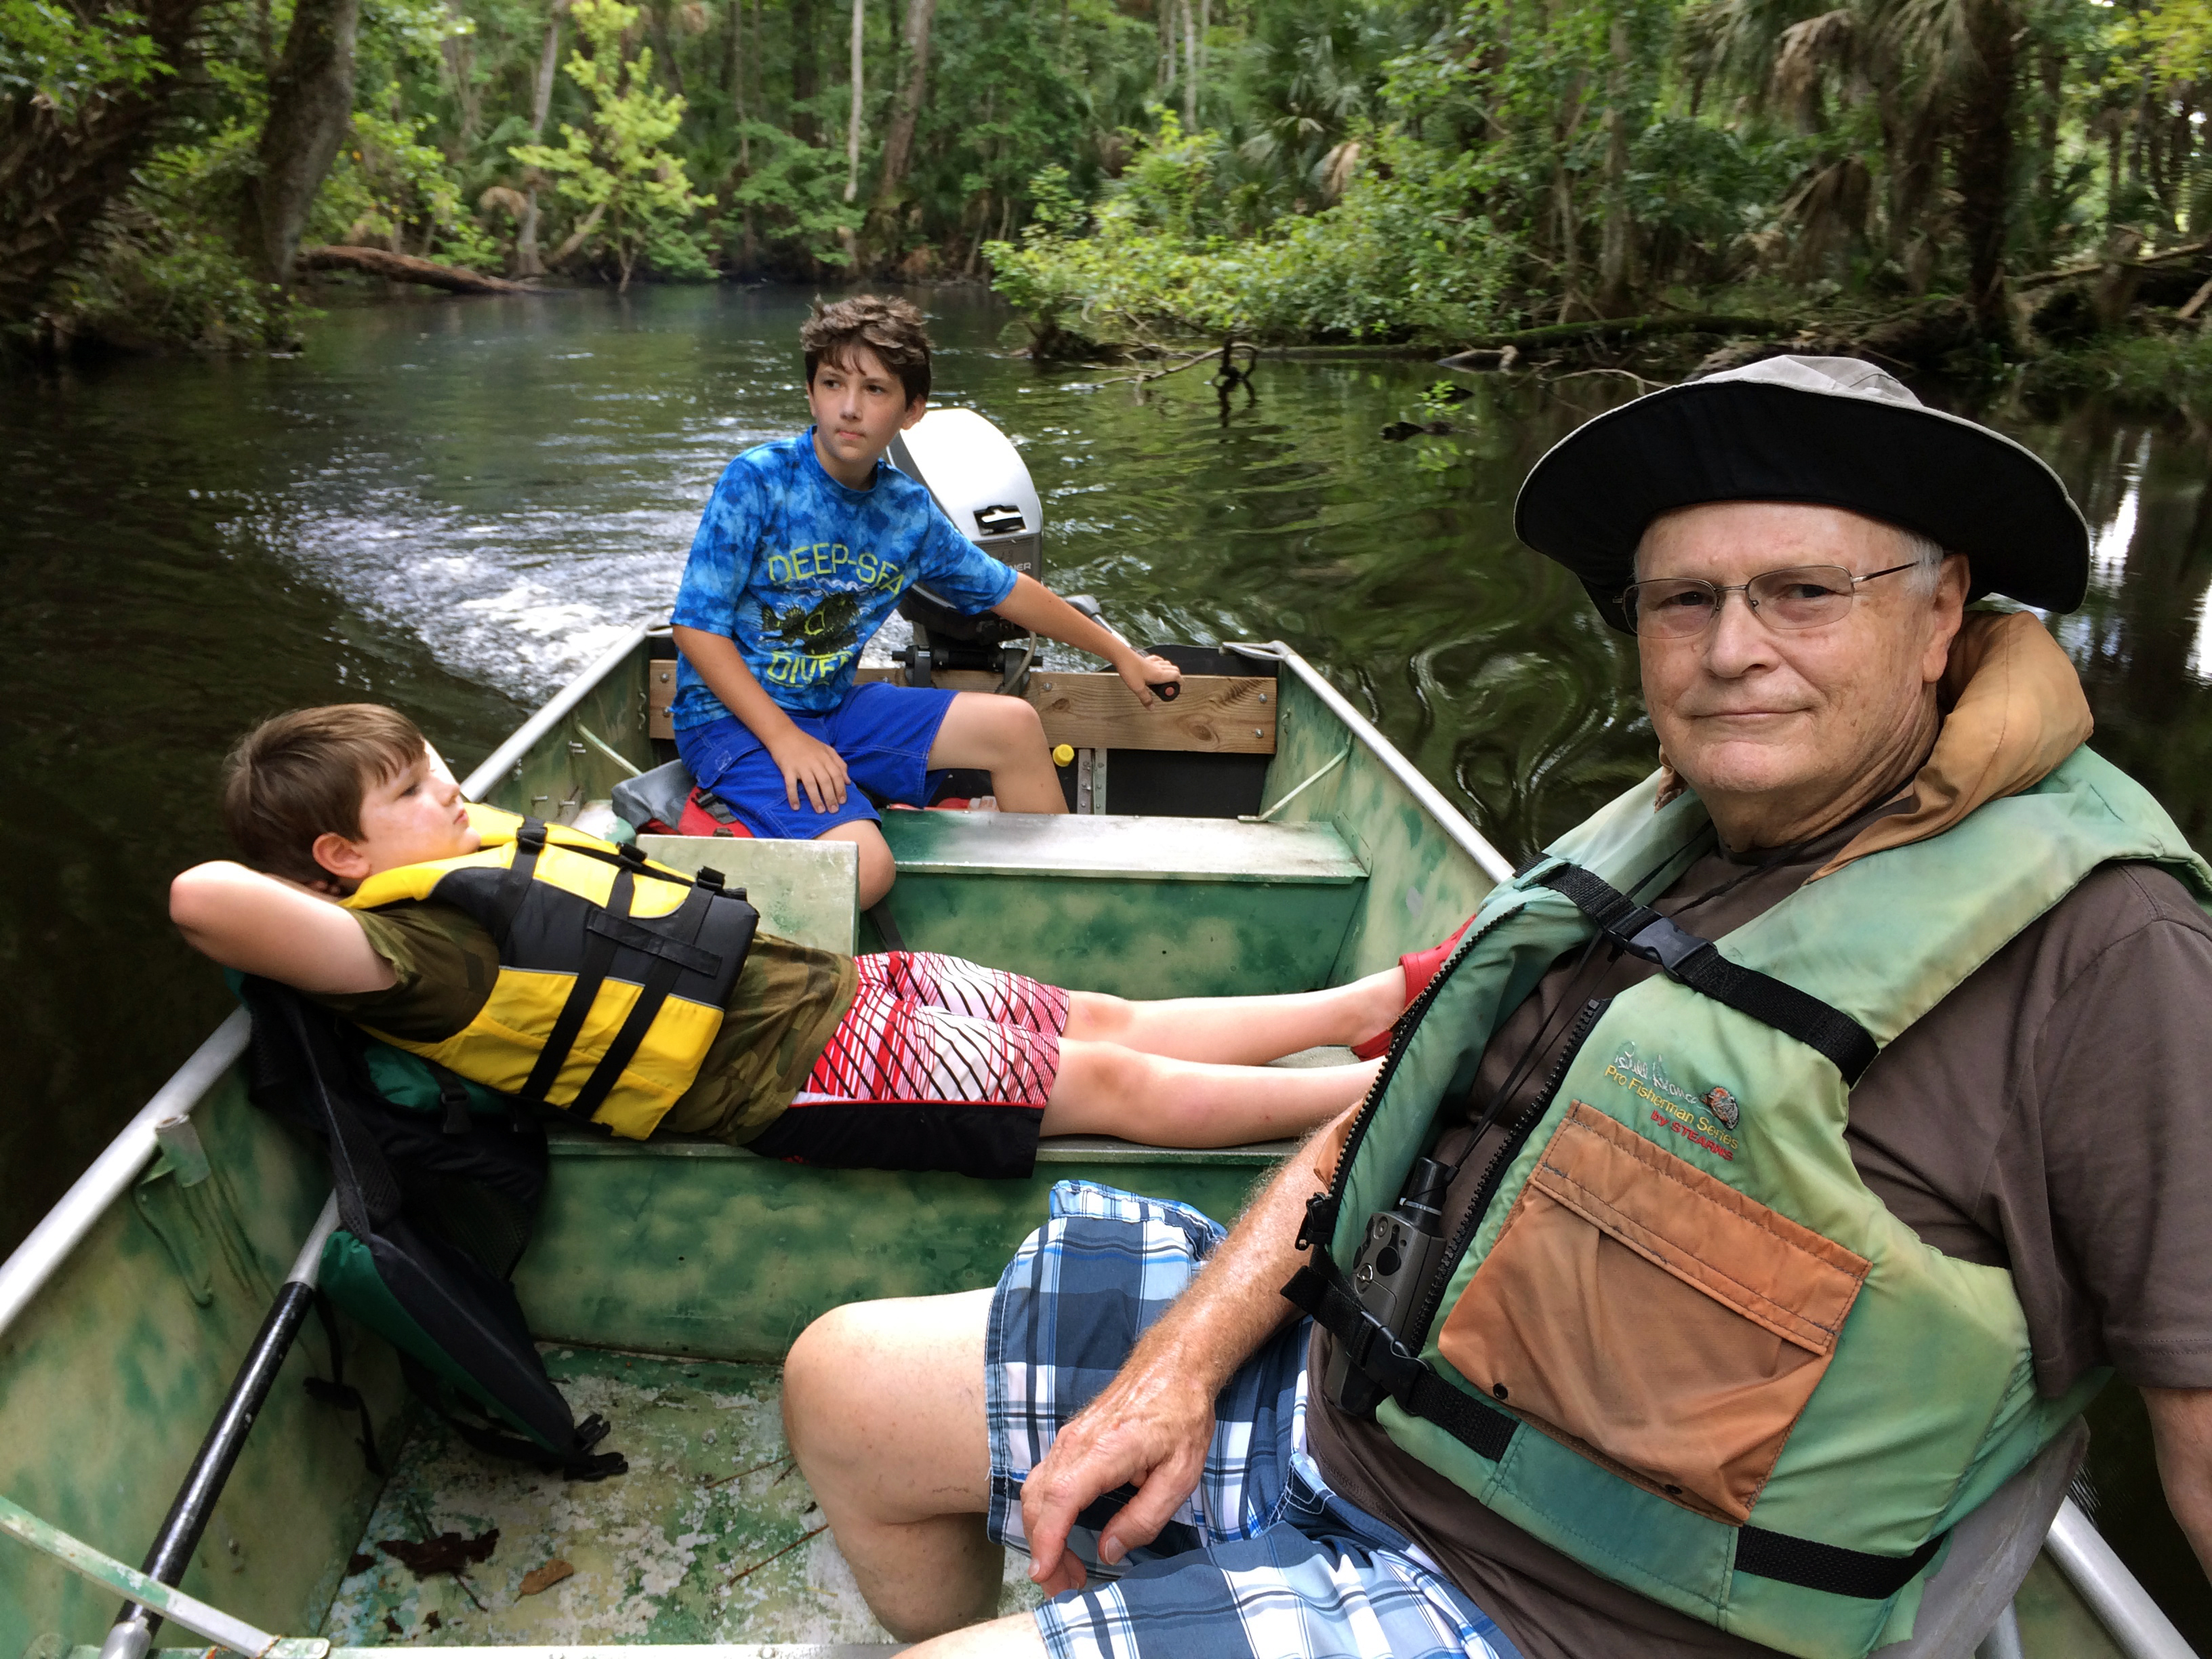 outdoor sports of boating on wekiva river florida